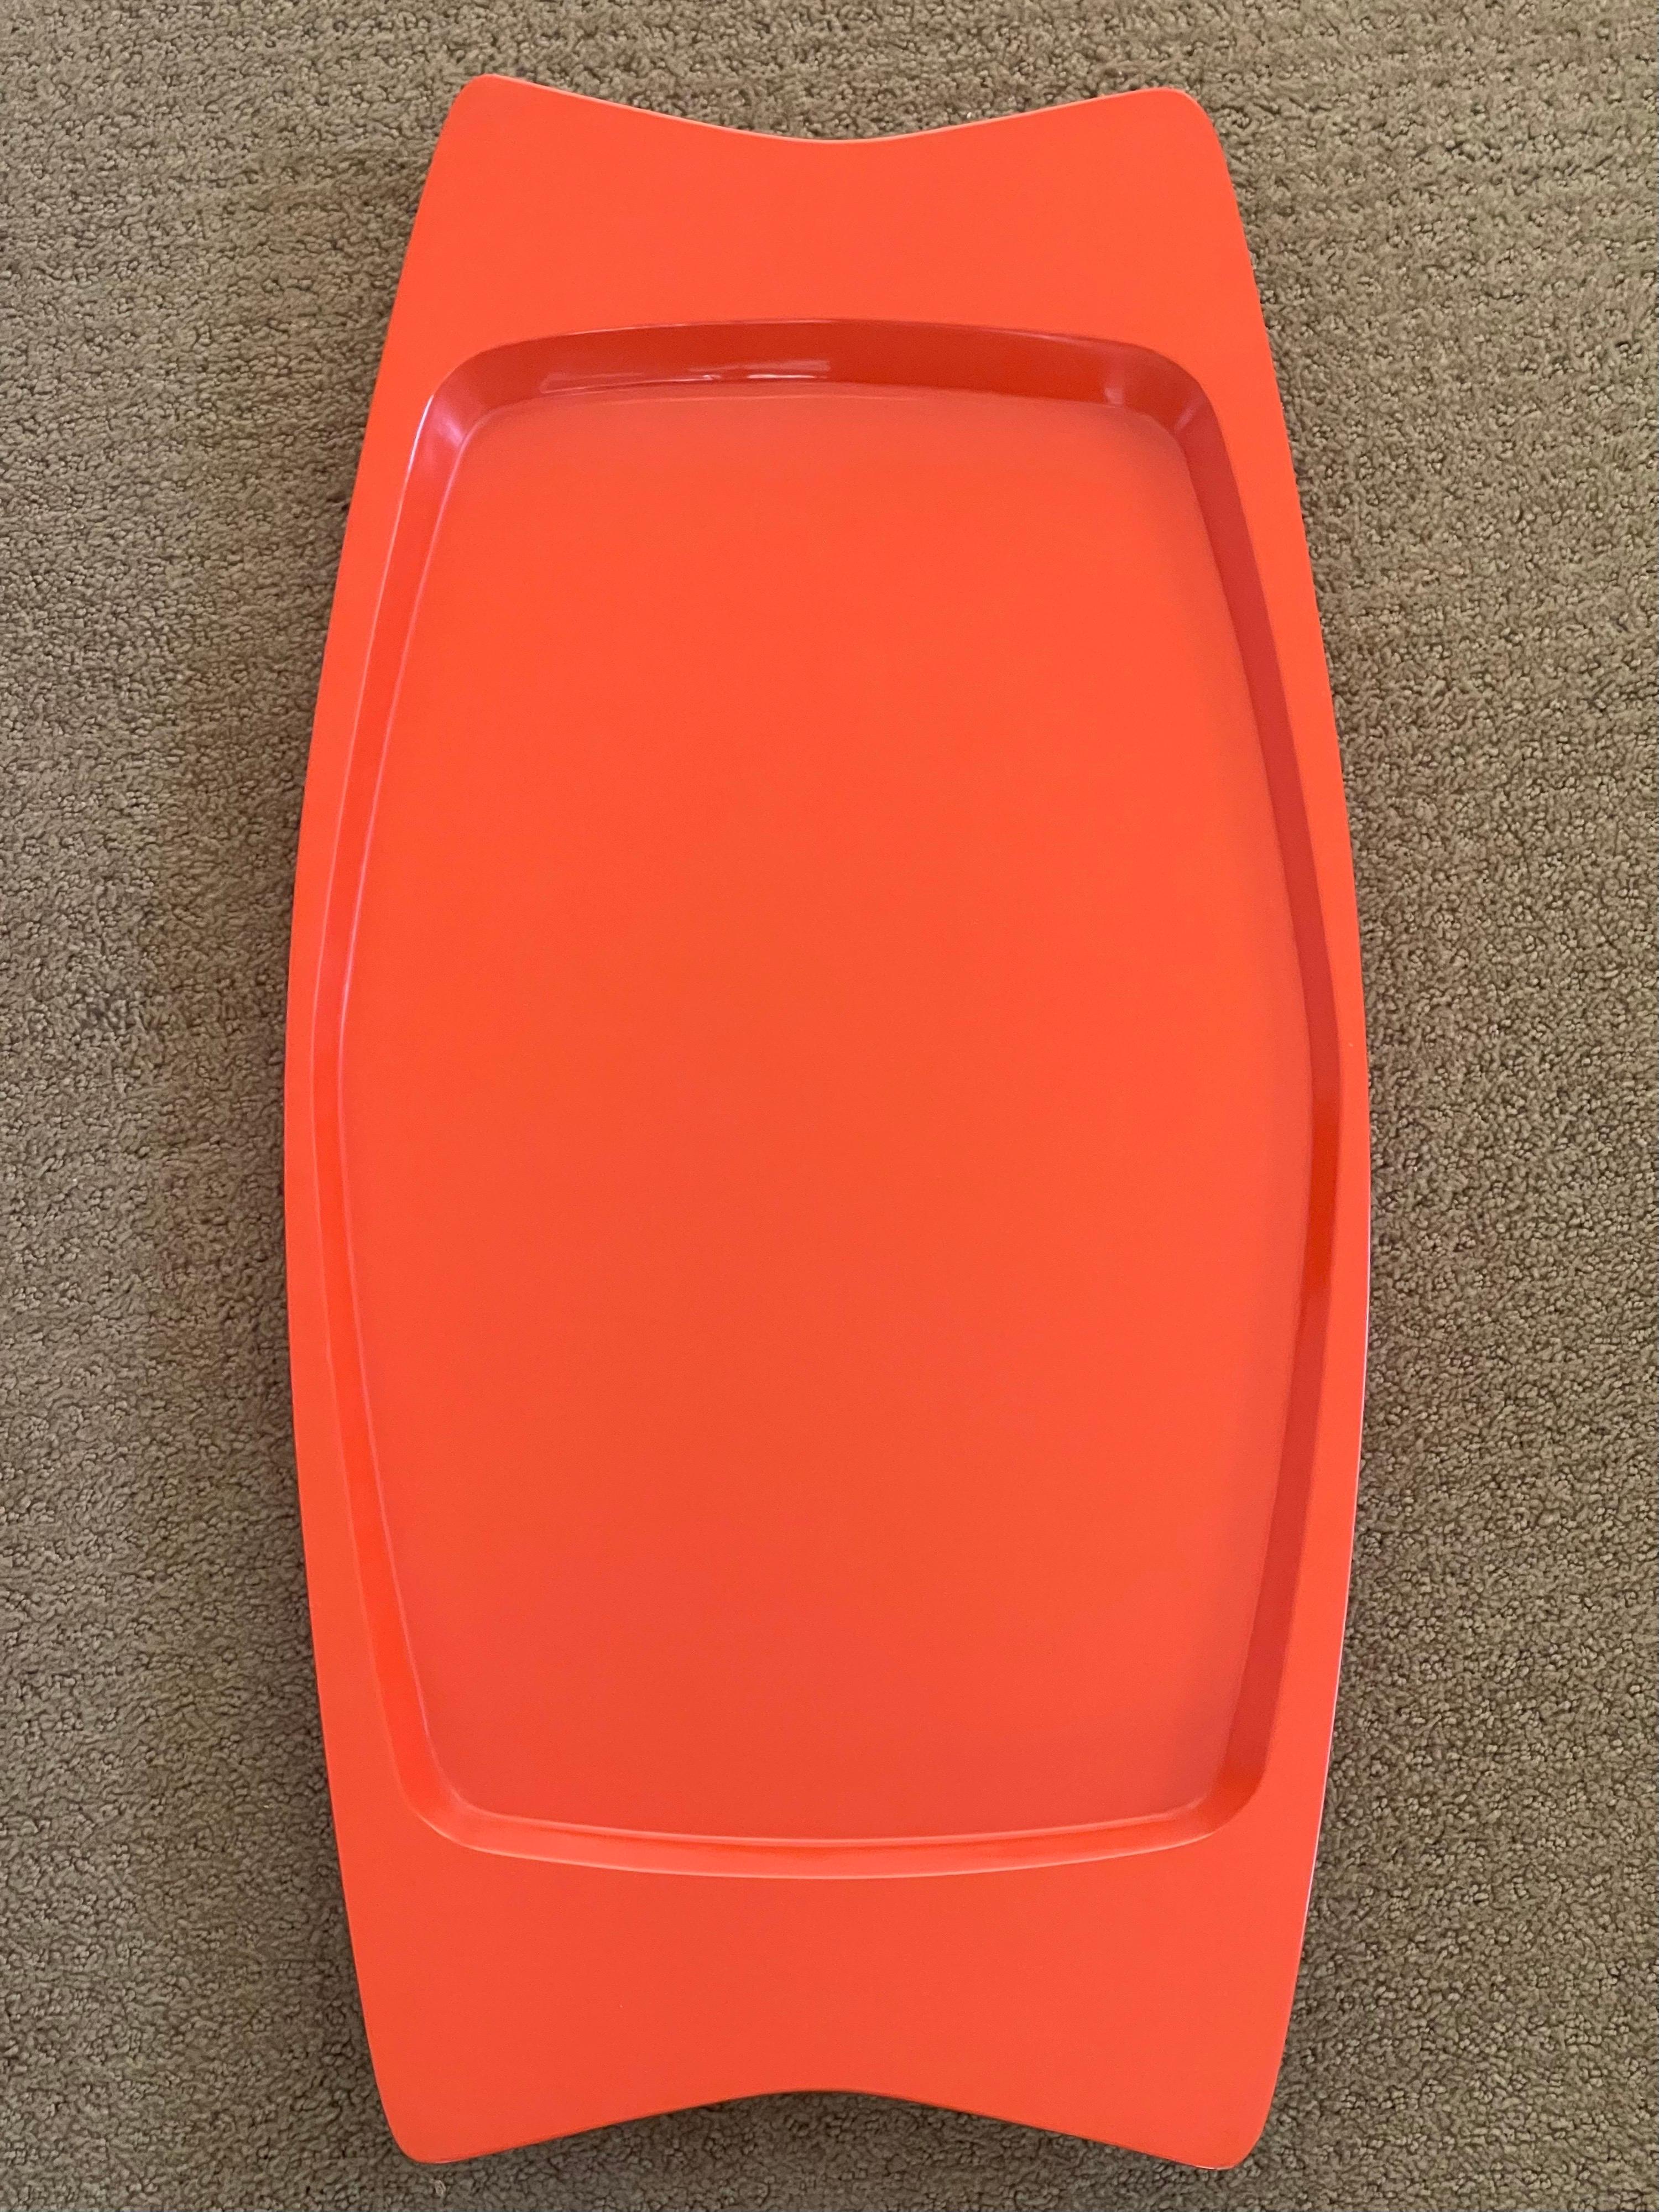 Beautiful and quite rare extra large rectangular orange lacquer tray by Jens Quistgaard for Dansk, circa 1950s (early production). Original condition with raised edges and elegant lines; the tray measures is 28